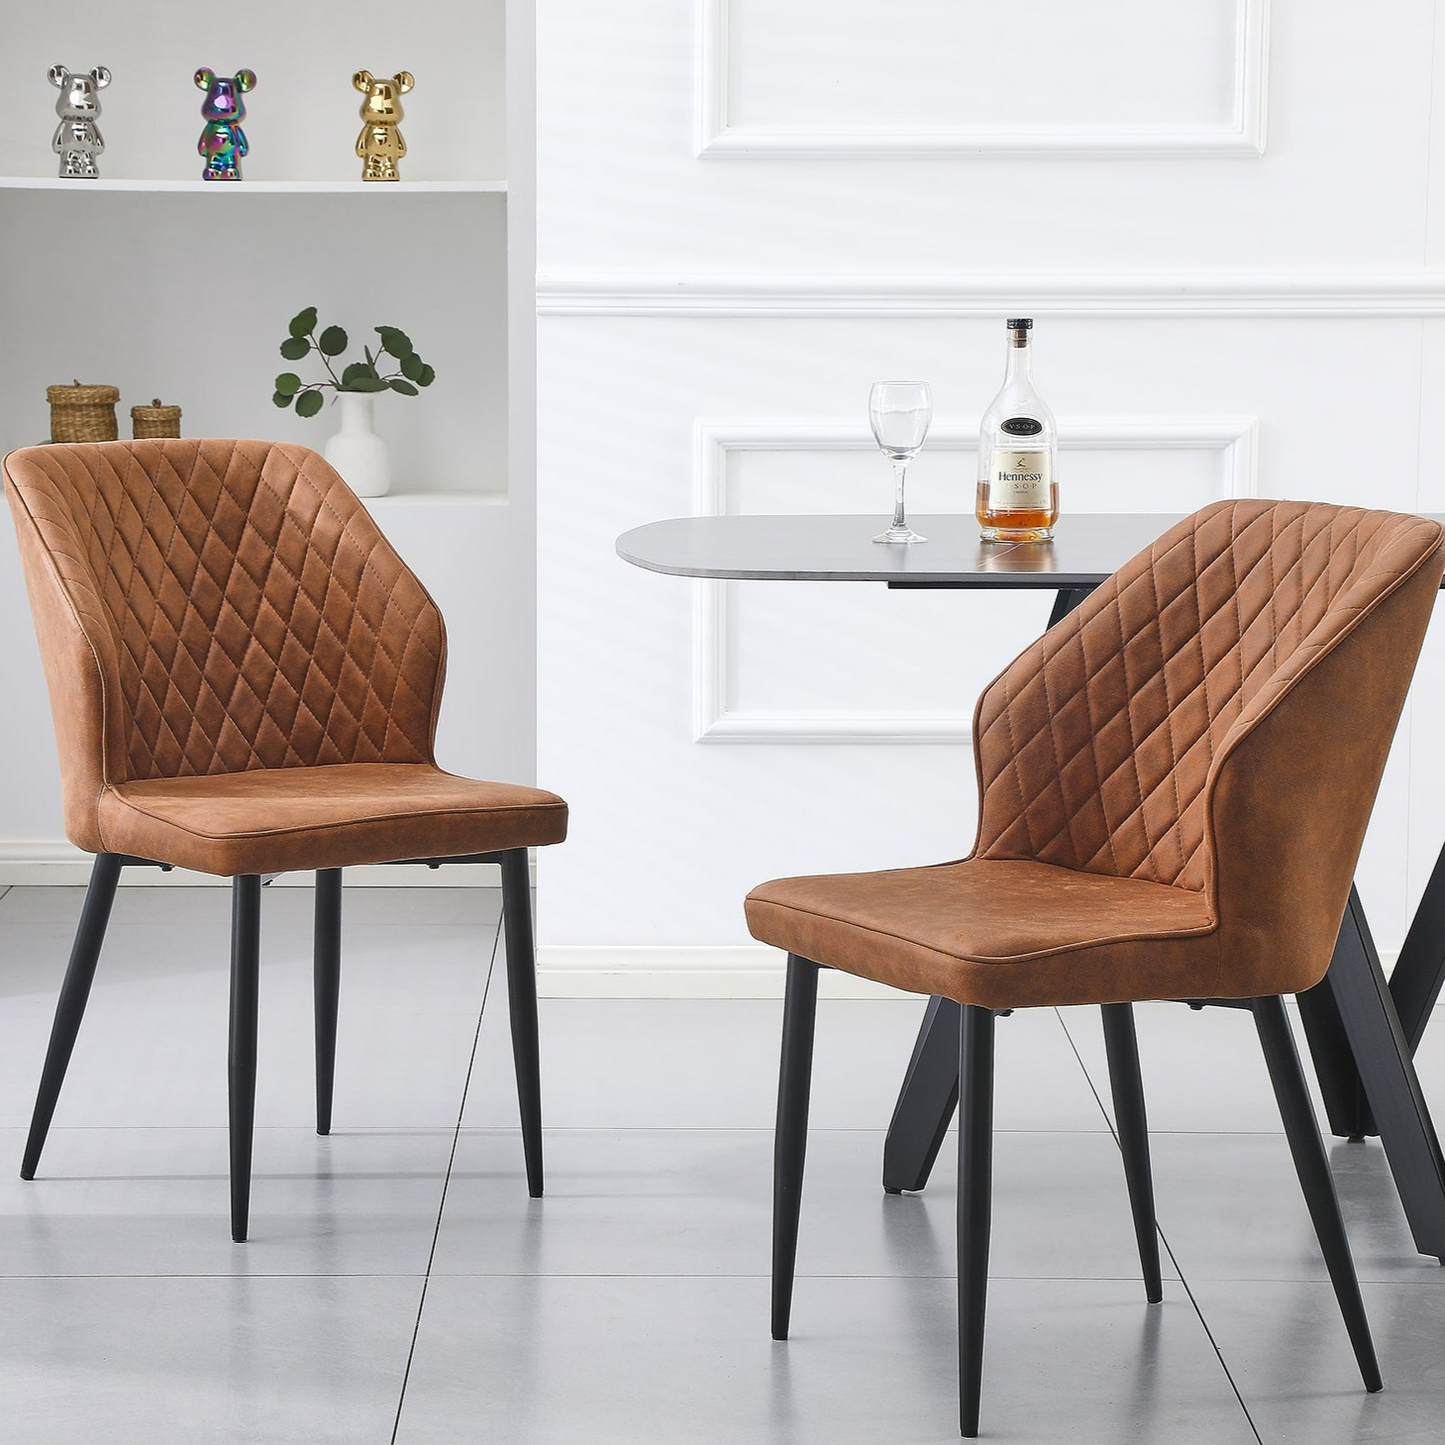 Ava Set of 4 Cross Pattern Dining Chair - Brown